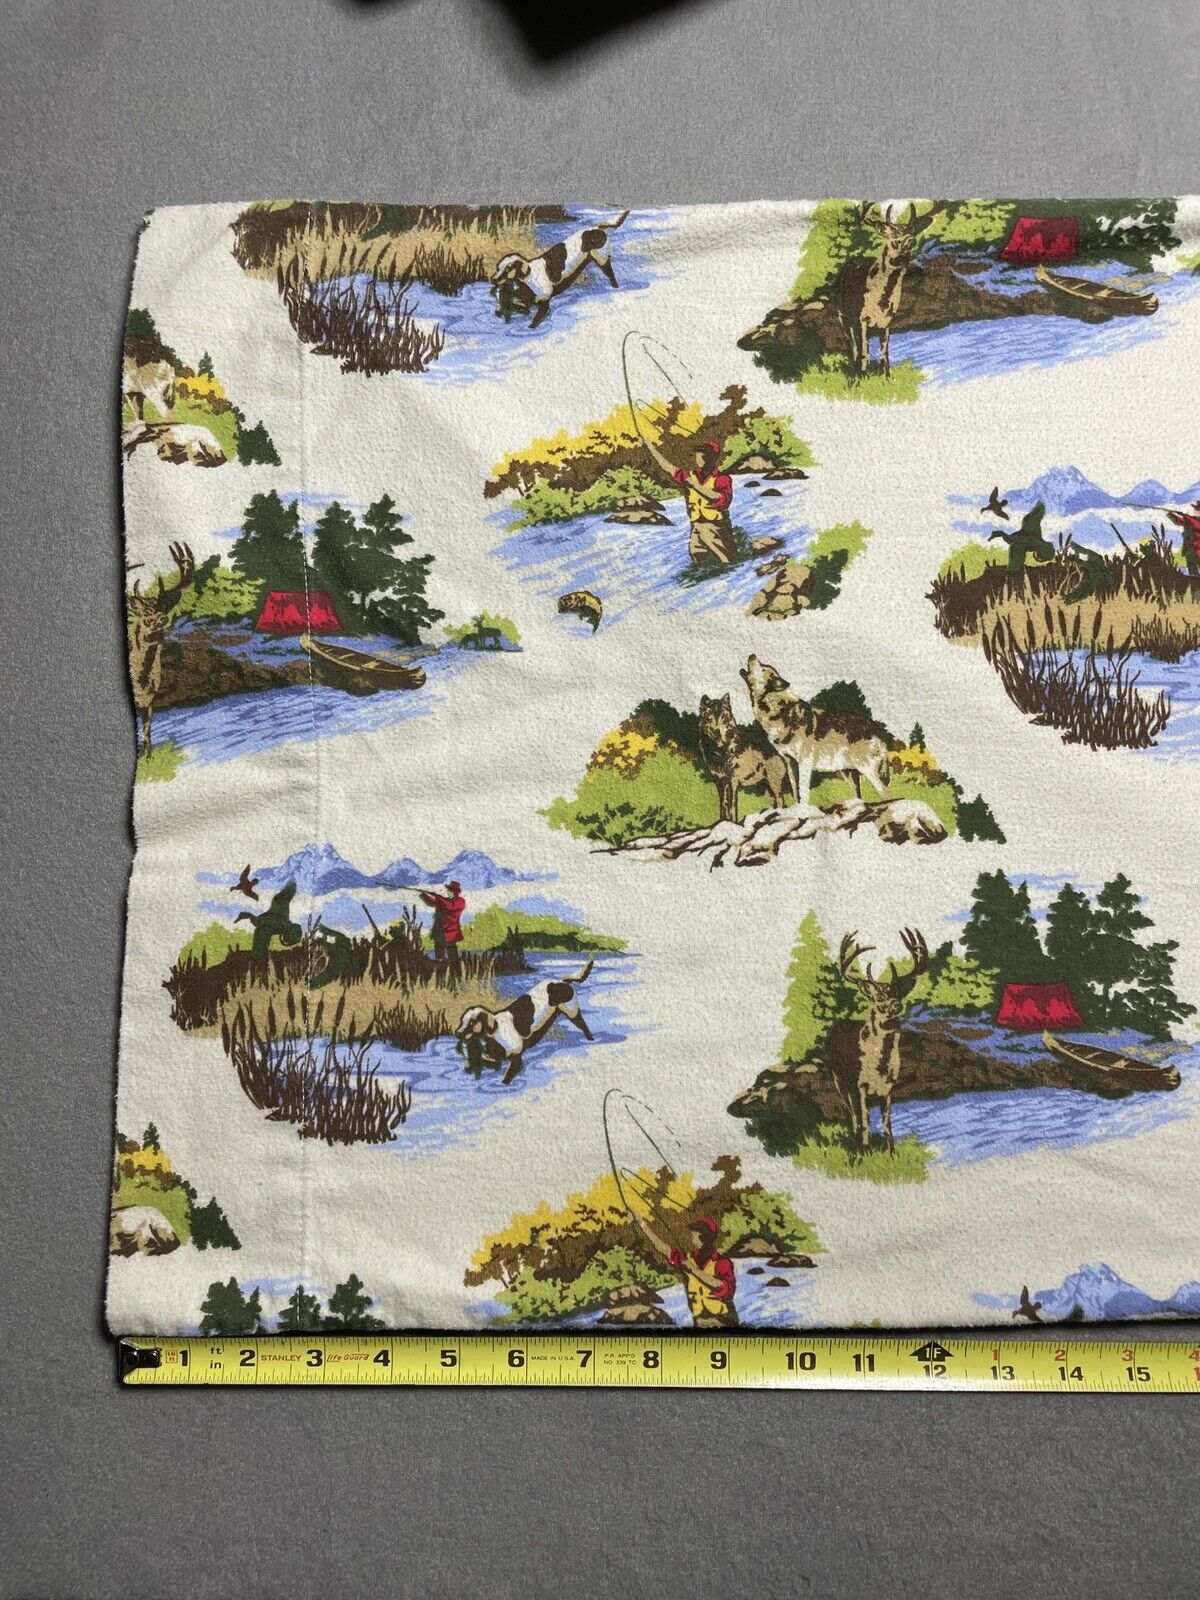 KING 100% Cotton Flannel FLAT SHEET And Pillowcase Camping/Fishing/Elk/Wolves